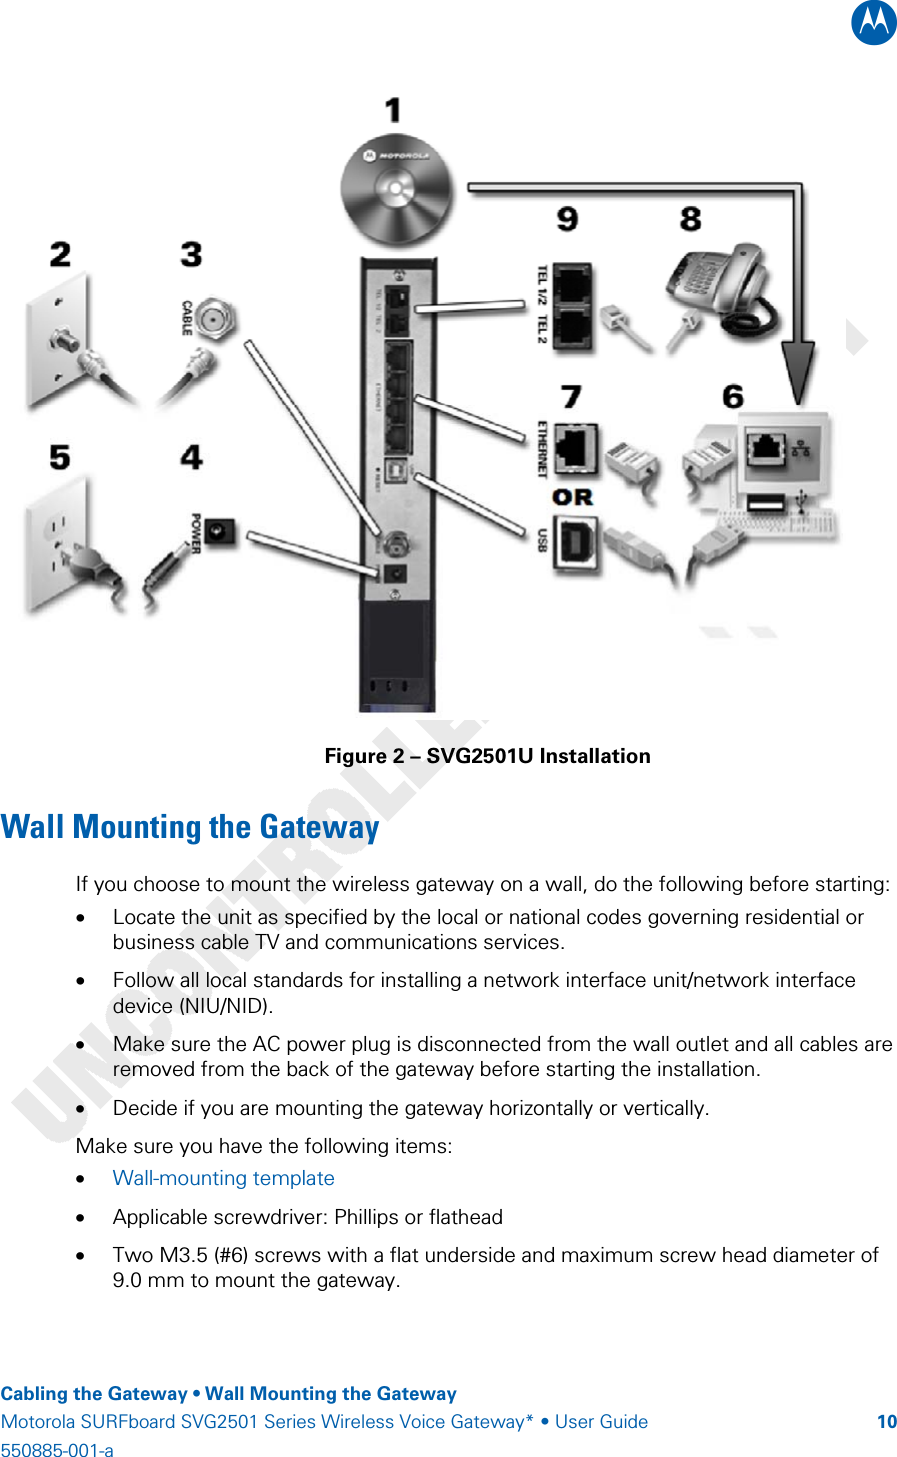 B    Cabling the Gateway • Wall Mounting the Gateway Motorola SURFboard SVG2501 Series Wireless Voice Gateway* • User Guide  10550885-001-a    Figure 2 – SVG2501U Installation Wall Mounting the Gateway  If you choose to mount the wireless gateway on a wall, do the following before starting: • Locate the unit as specified by the local or national codes governing residential or business cable TV and communications services. • Follow all local standards for installing a network interface unit/network interface device (NIU/NID). • Make sure the AC power plug is disconnected from the wall outlet and all cables are removed from the back of the gateway before starting the installation. • Decide if you are mounting the gateway horizontally or vertically. Make sure you have the following items: • Wall-mounting template • Applicable screwdriver: Phillips or flathead • Two M3.5 (#6) screws with a flat underside and maximum screw head diameter of 9.0 mm to mount the gateway. 